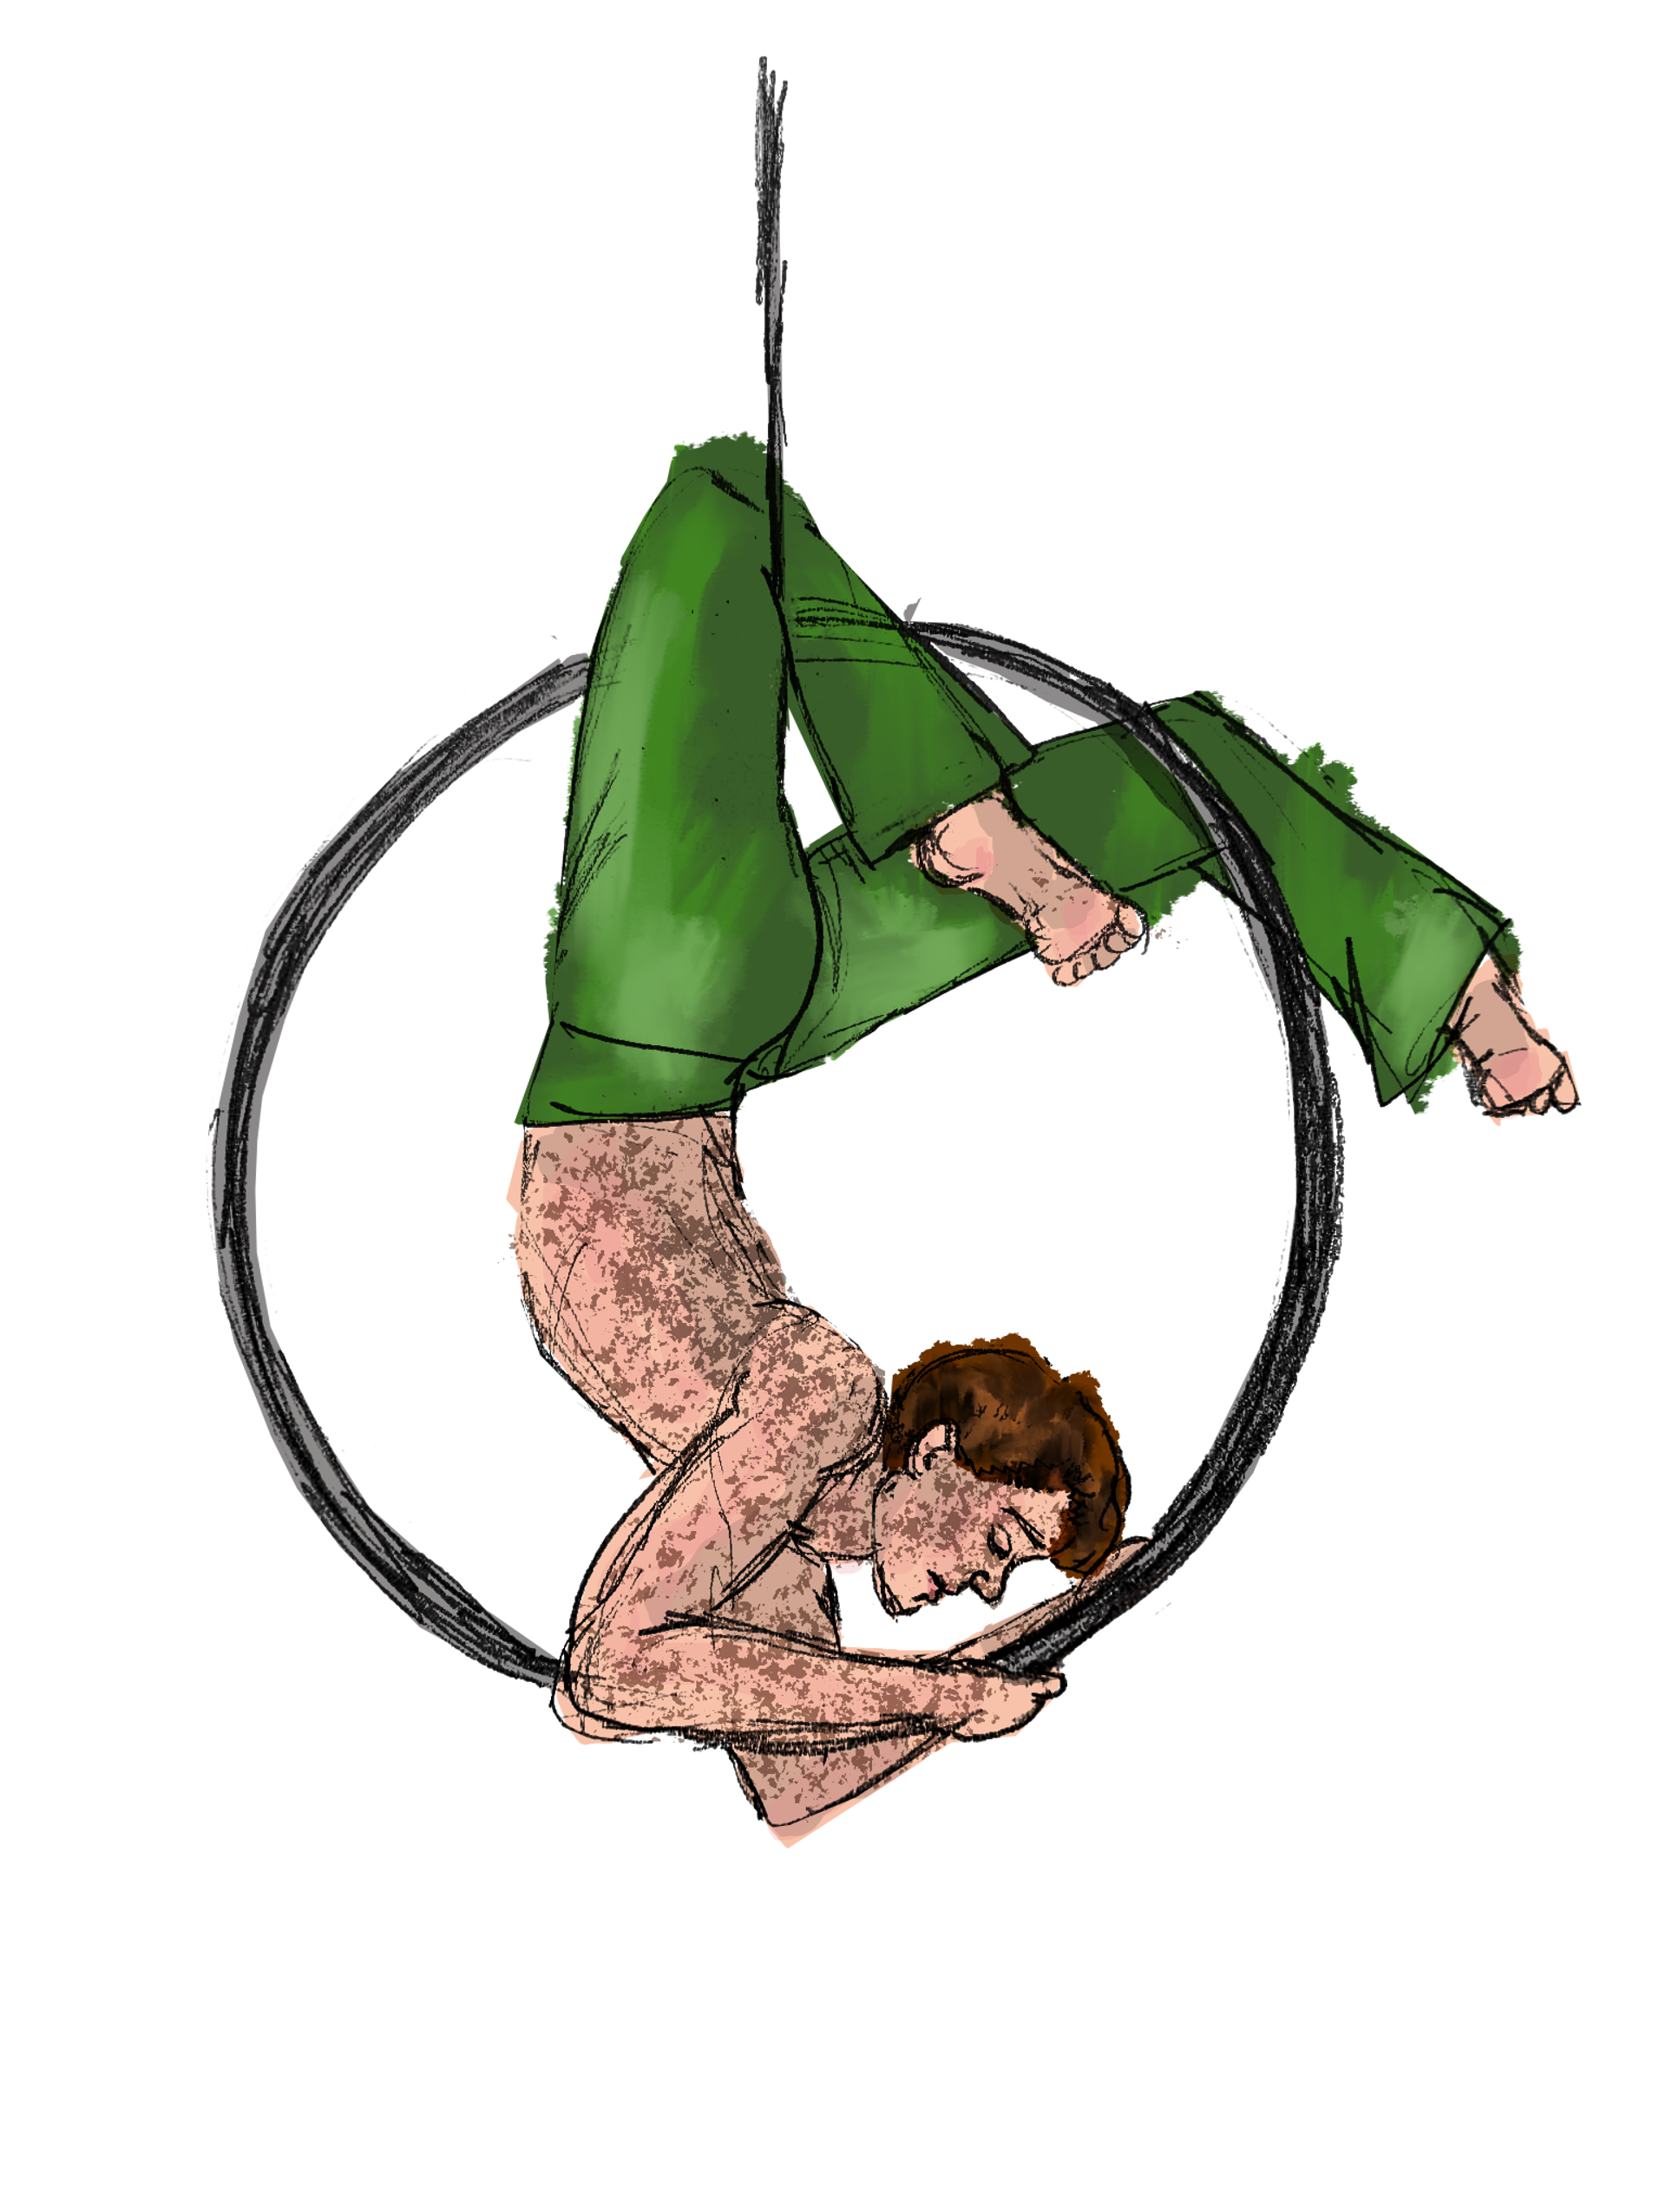 Illustration of white freckled male aerialist hoop dancer upside down with arched back wearing green trousers and no top. 